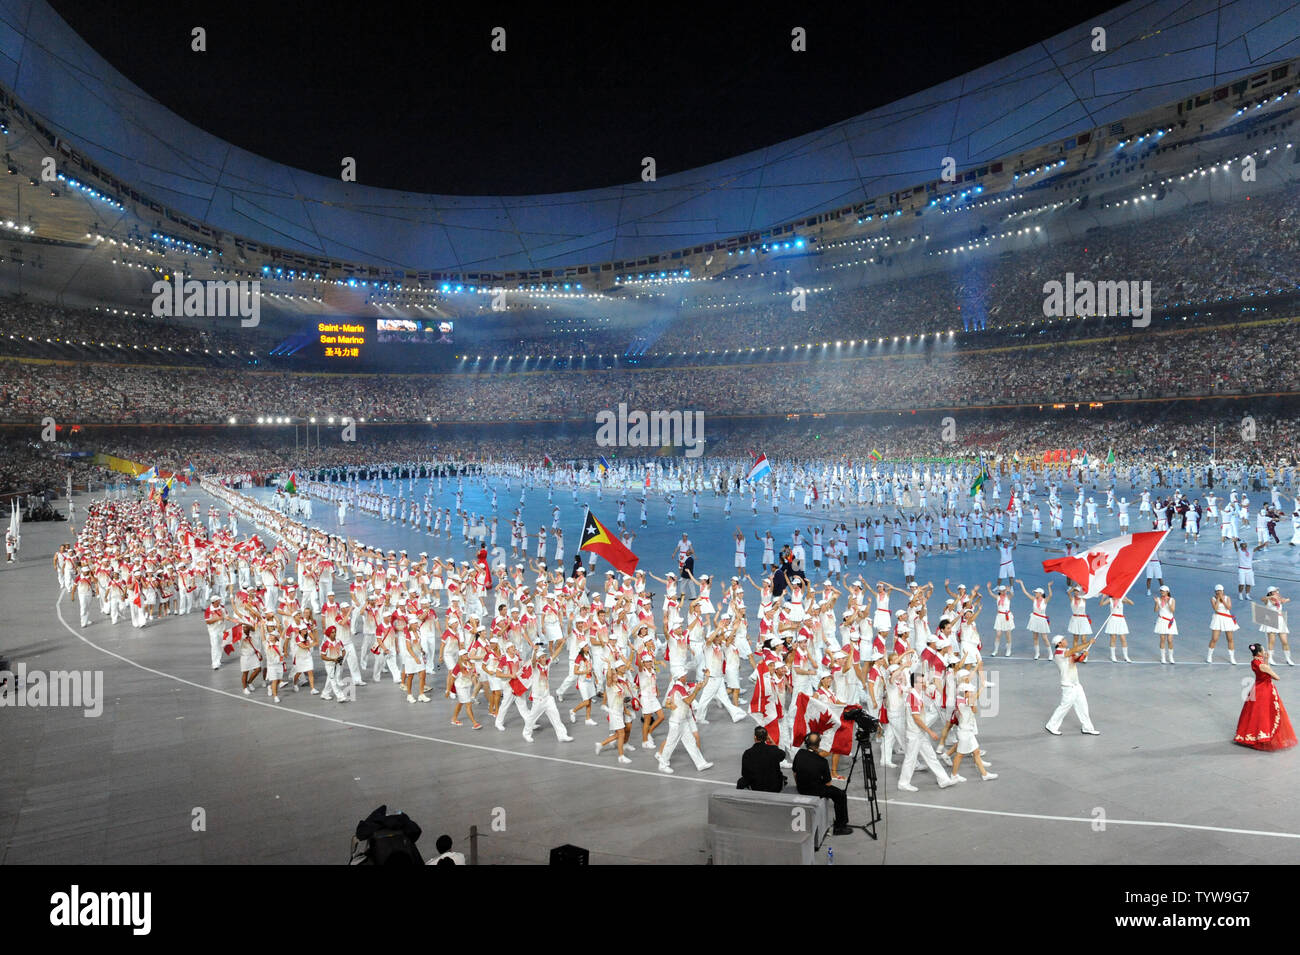 The Canadian team marches into the National Stadium, called the Bird's Nest, during the Opening Ceremony of the 2008 Summer Olympics in Beijing on August 8, 2008.   The Summer Games will run through August 24, 2008.   (UPI Photo/Pat Benic)   REPEAT Stock Photo